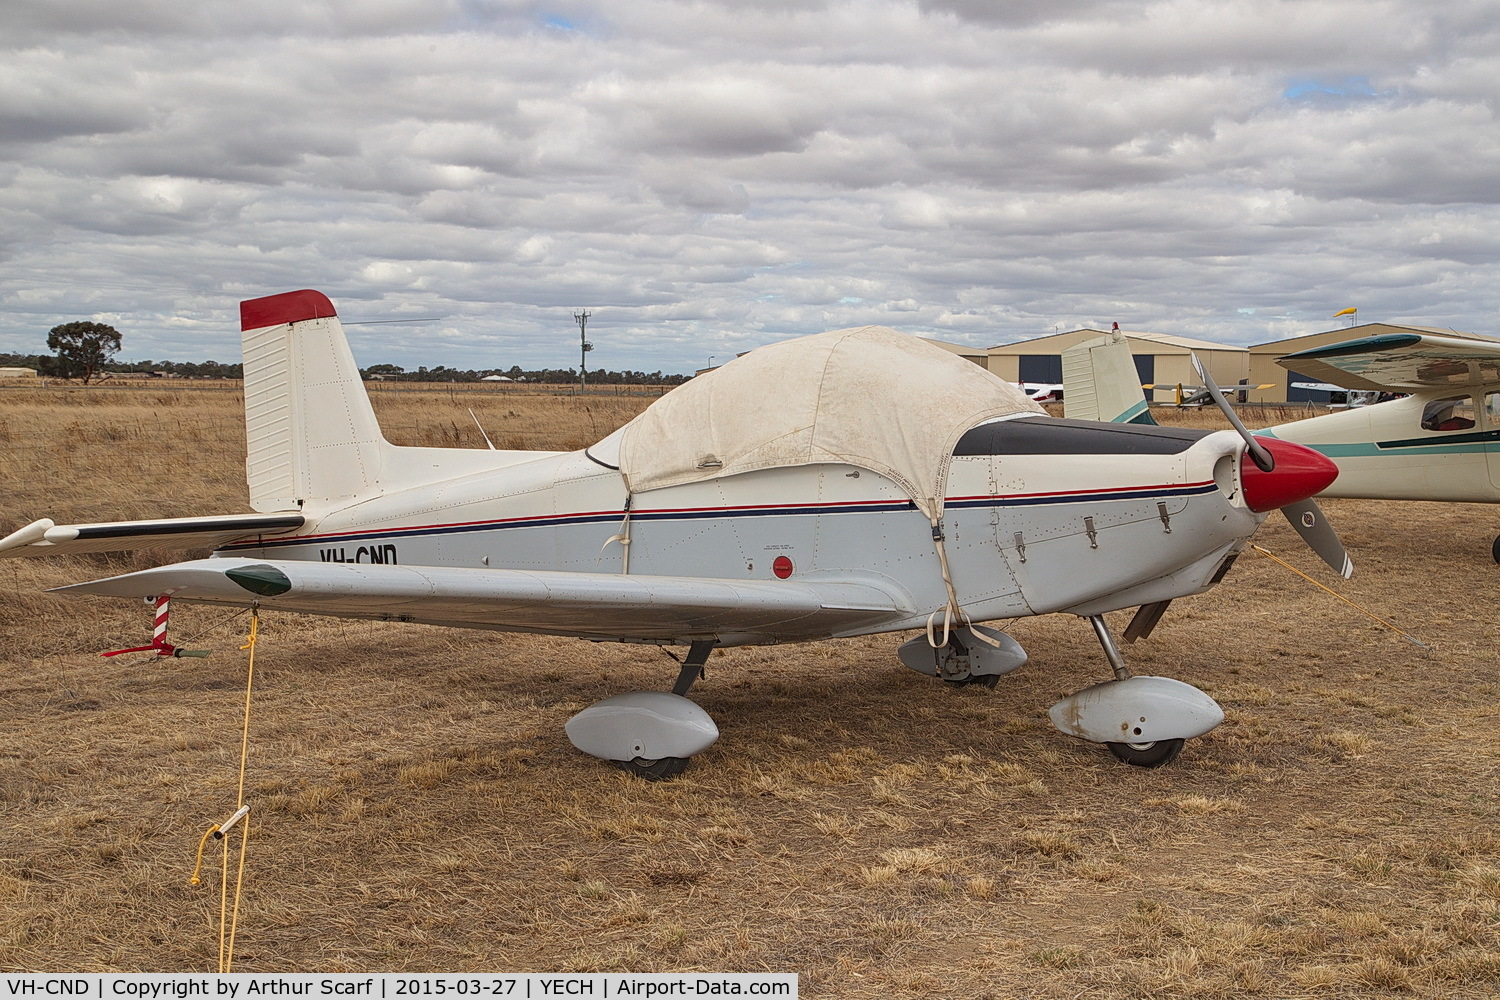 VH-CND, 1963 Victa AIRTOURER 115/A2 C/N 11, VH-CND at the AAAA fly in Echuca 2015